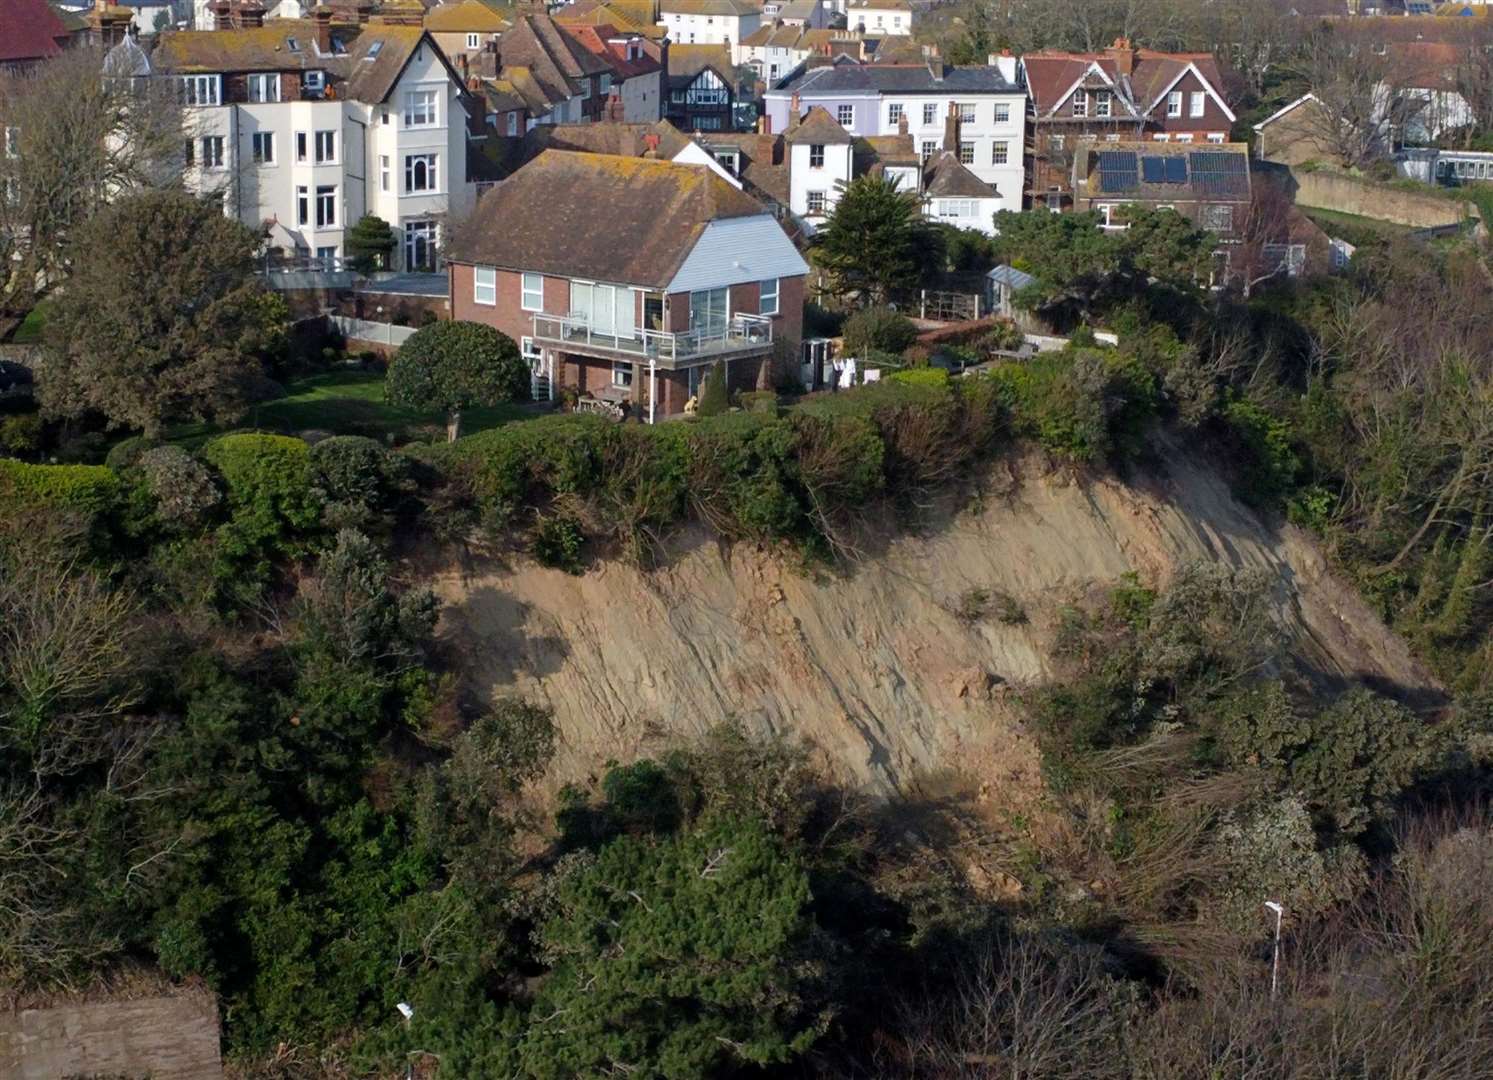 The most significant landslides in Folkestone have occurred above the Road of Remembrance. Picture: Barry Goodwin